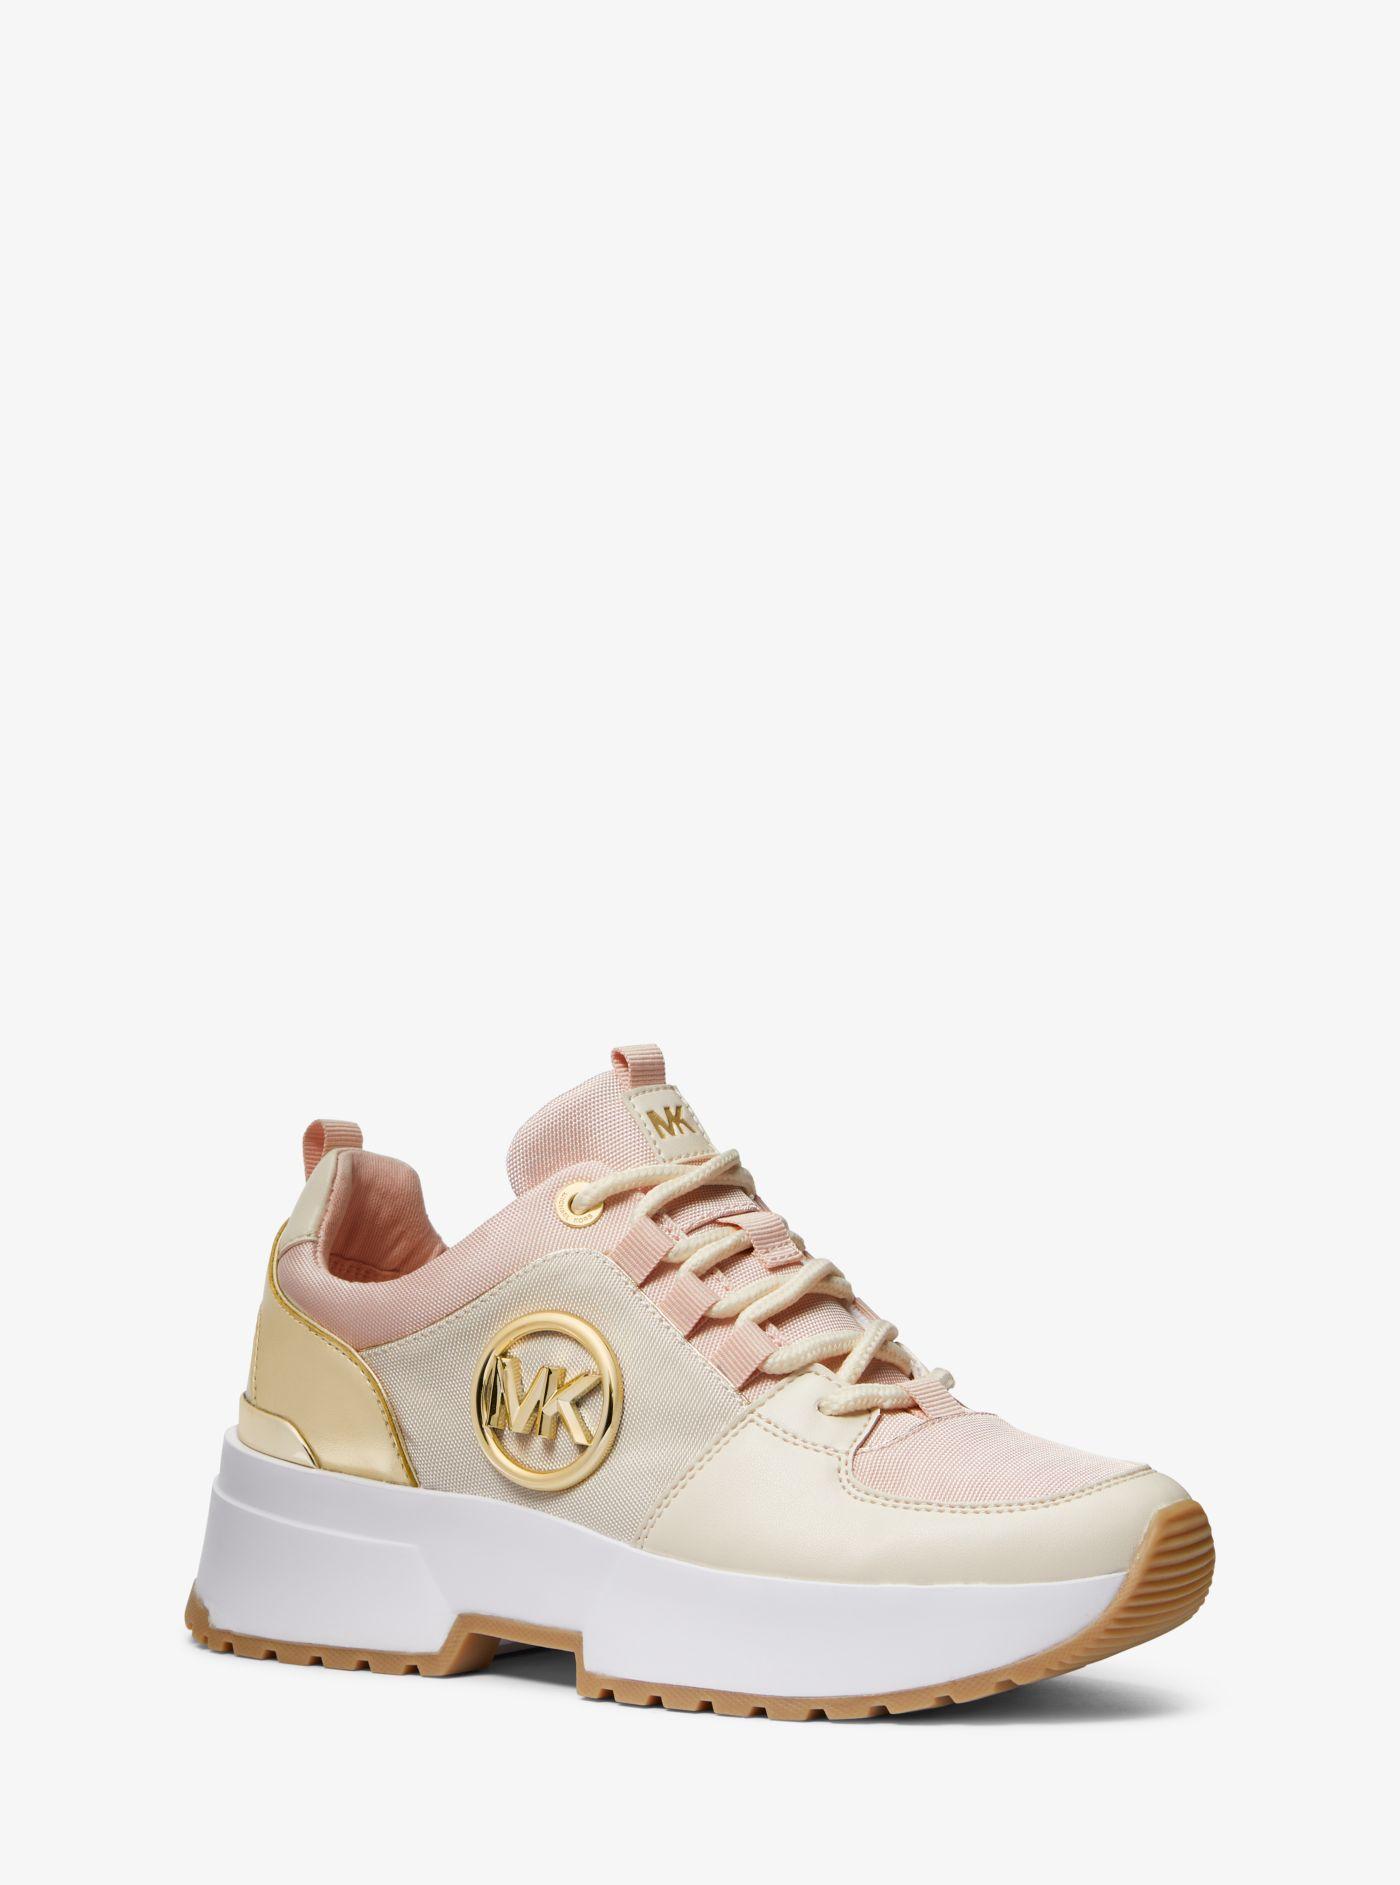 Michael Kors Cosmo Canvas Trainer in White | Lyst